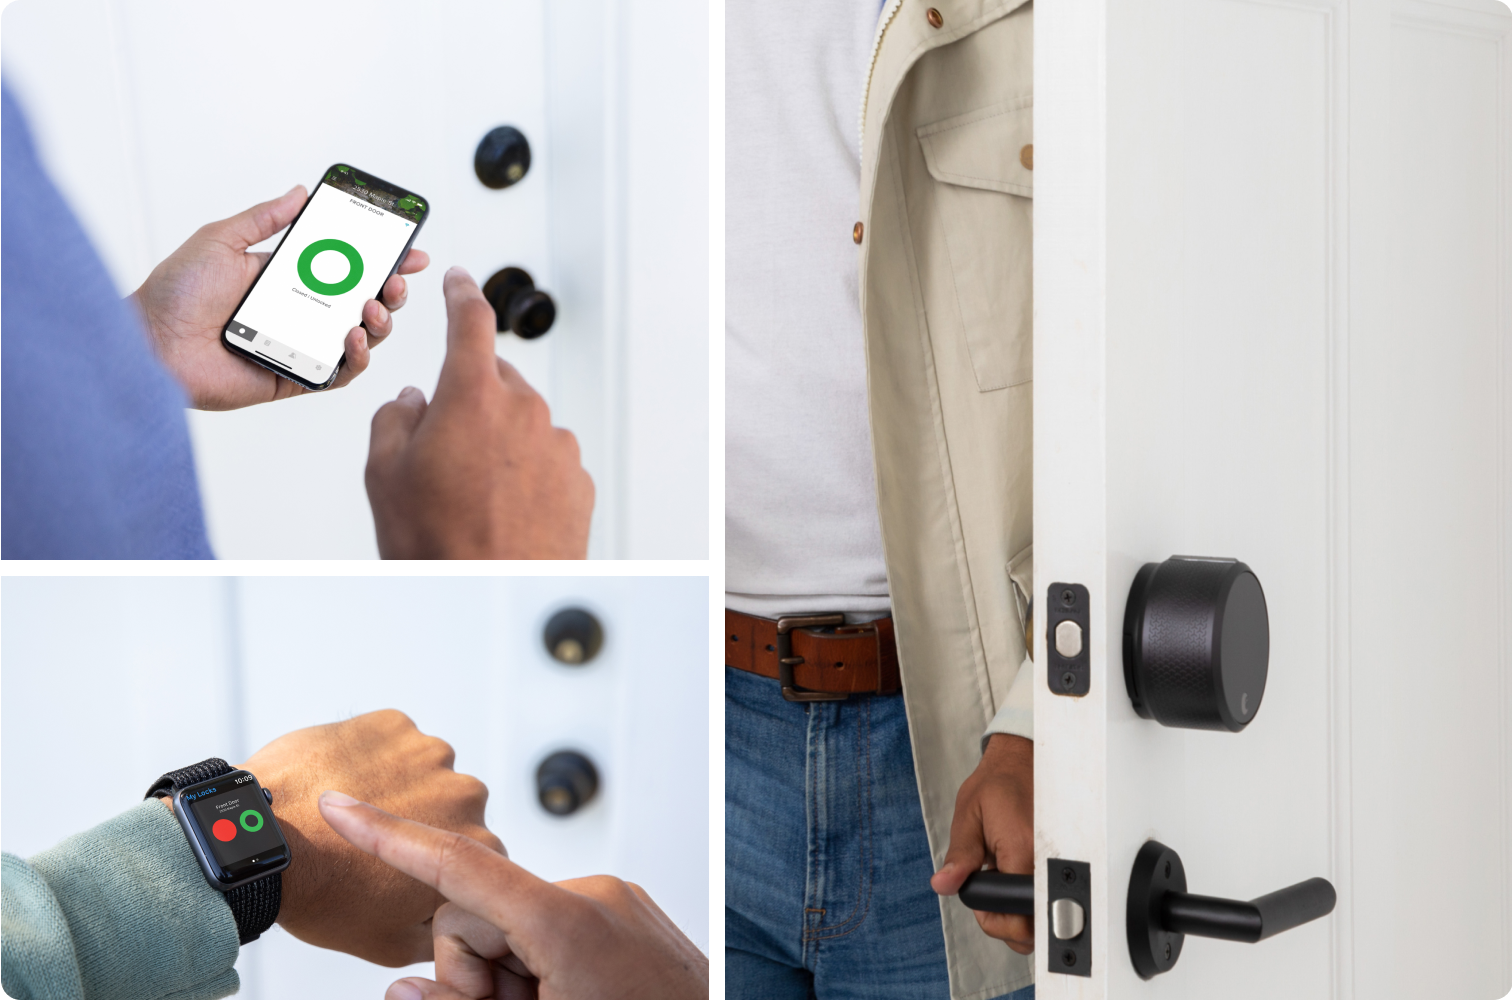 People unlocking their August smart lock with their smartphone and Apple Watch